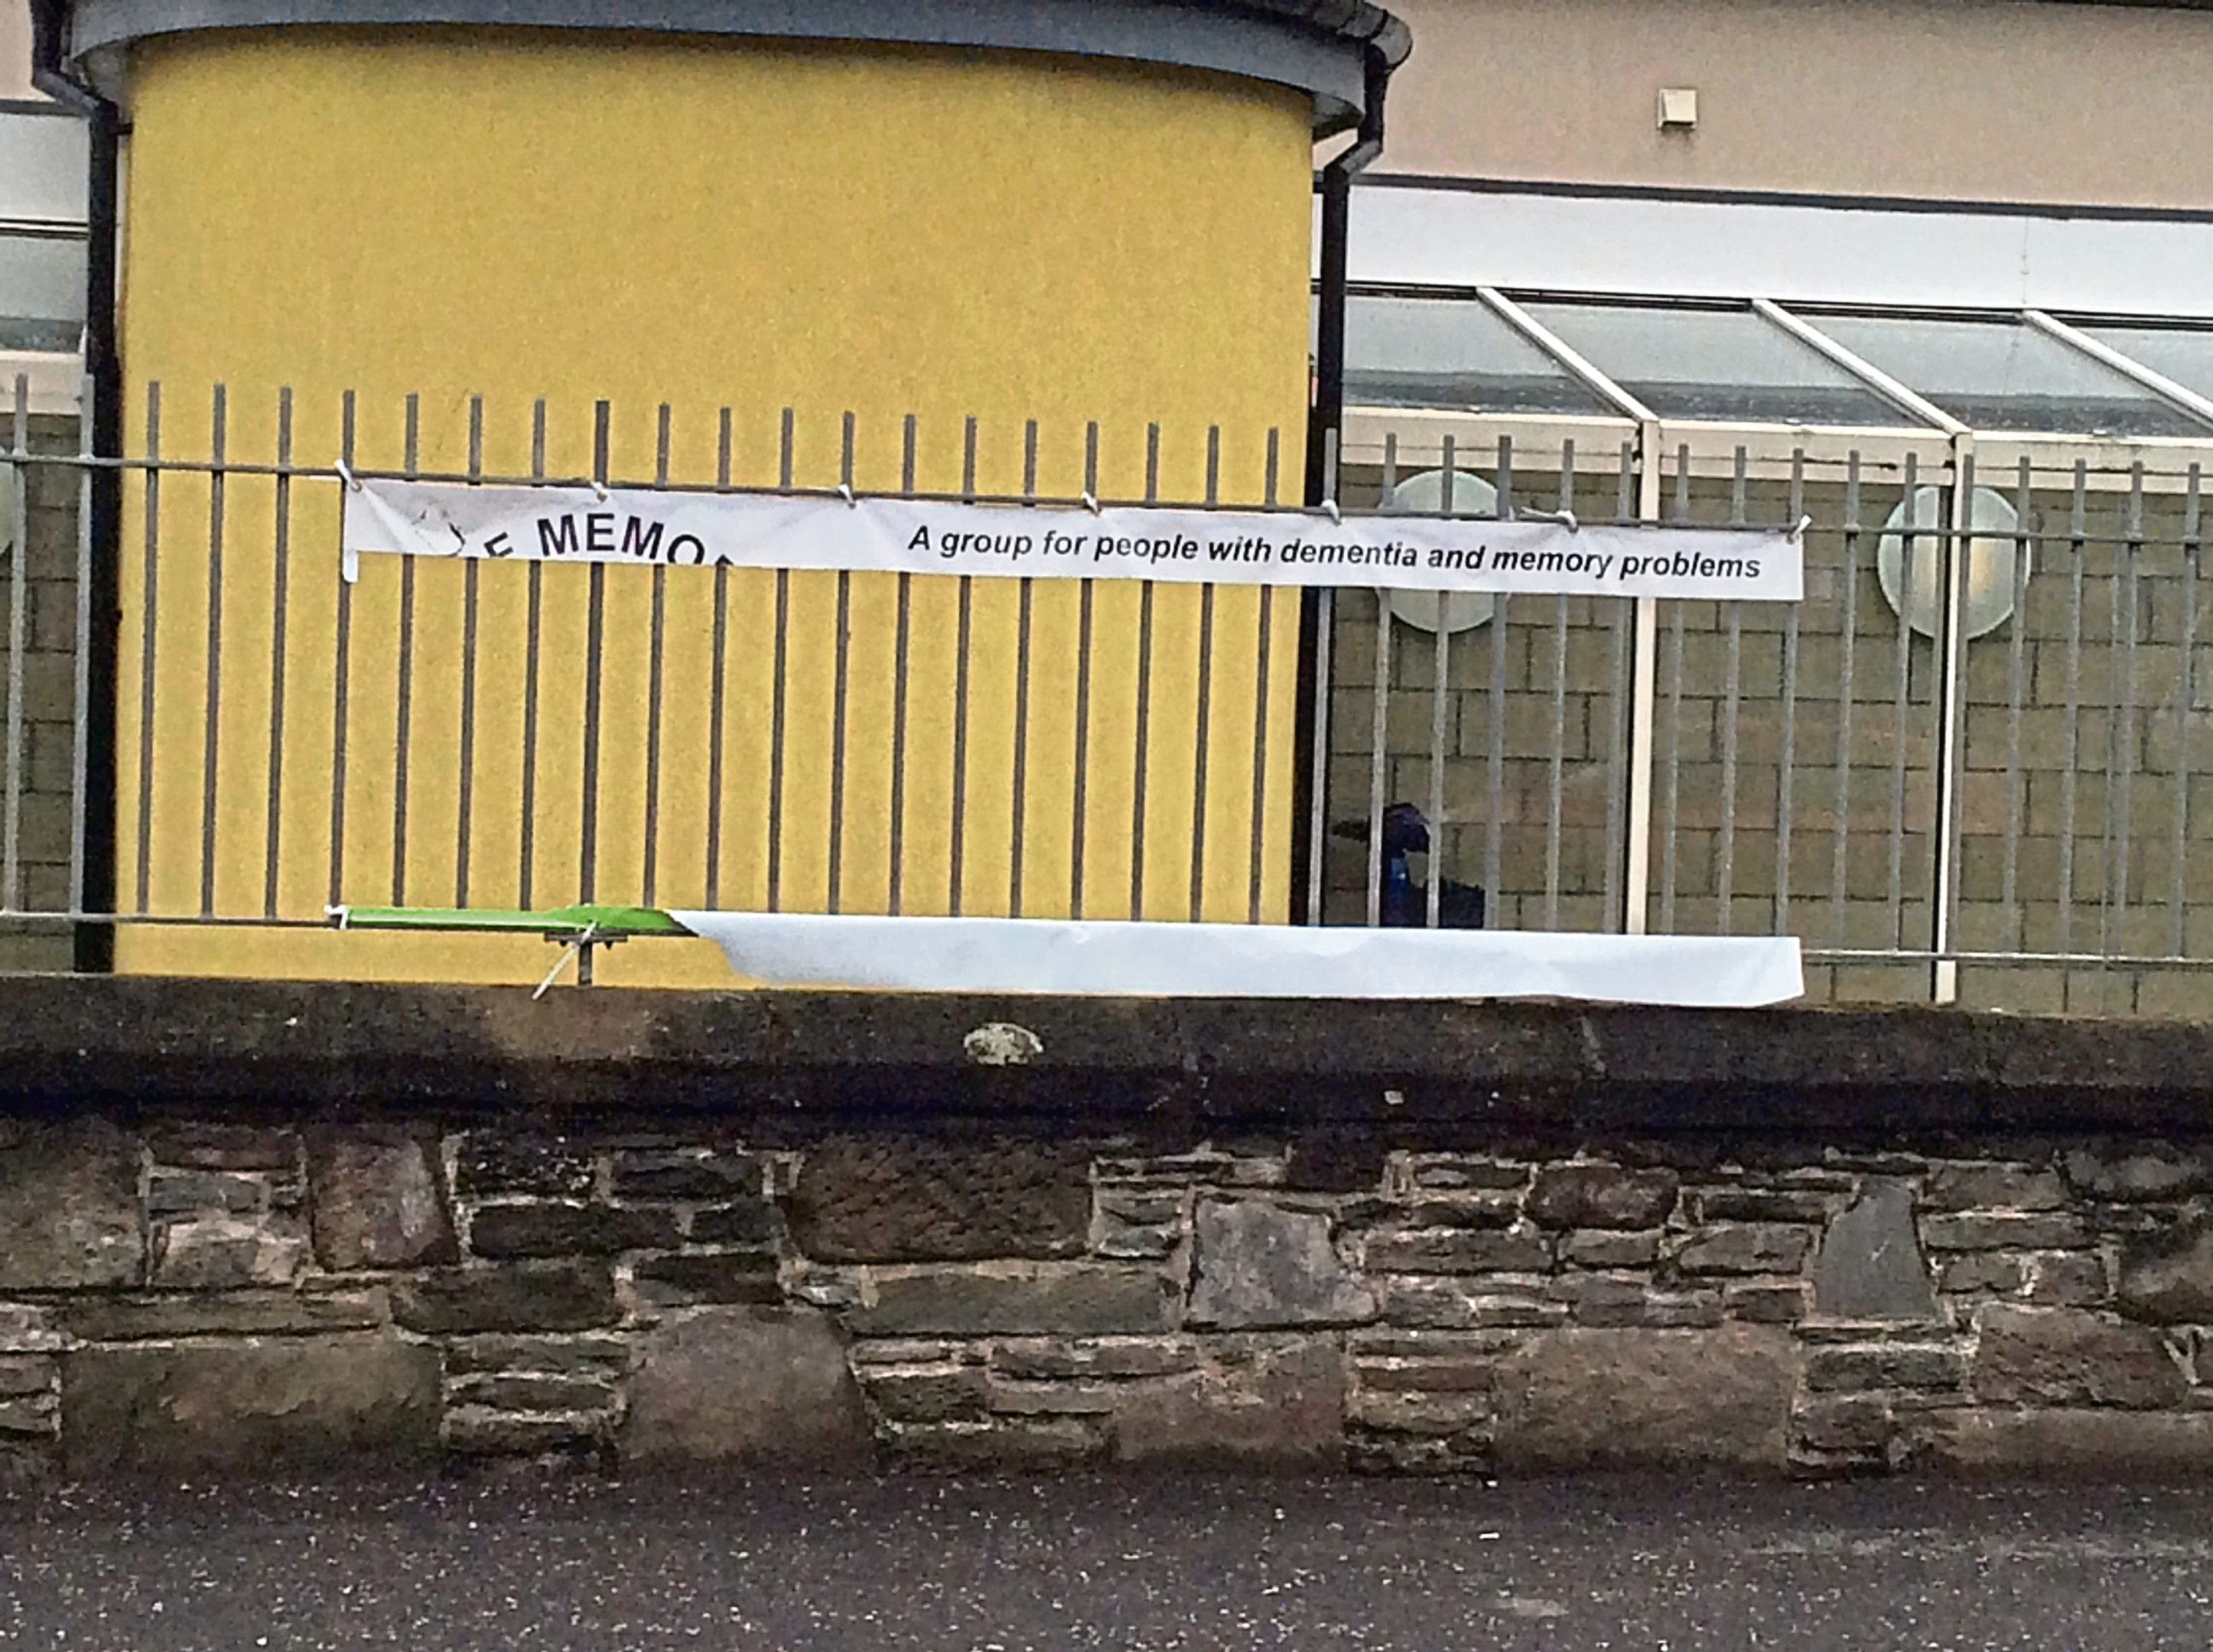 The Carnoustie Golf Memories group banner outside the Kinloch centre has been trashed by vandals